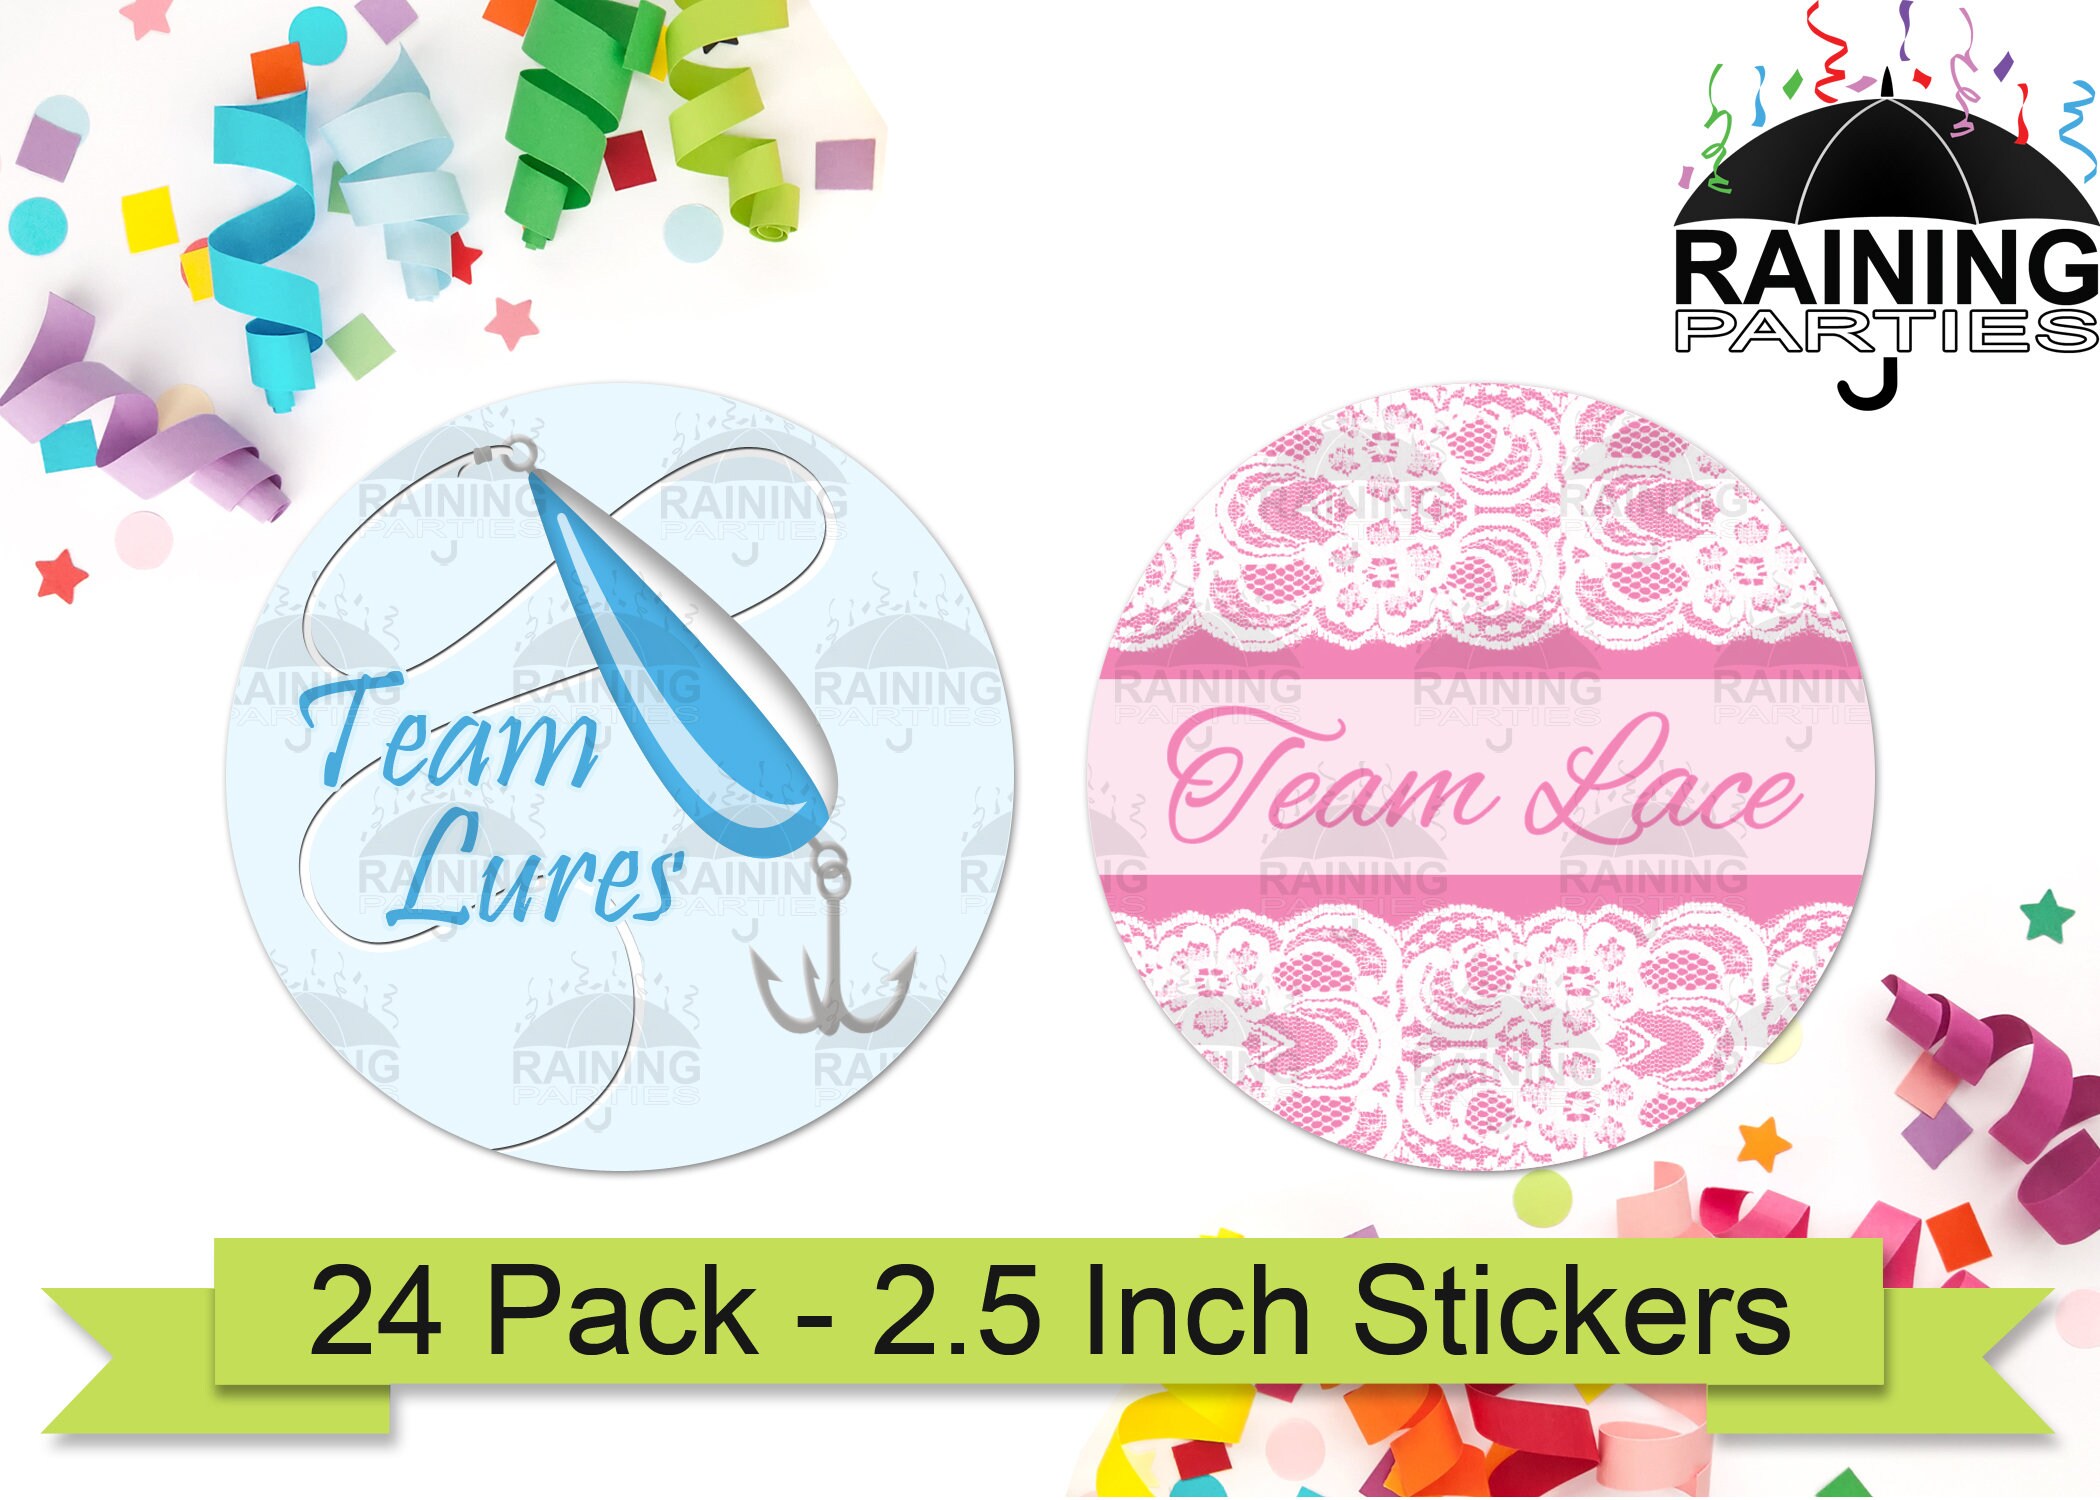 Lures or Lace Gender Reveal Party Supplies 